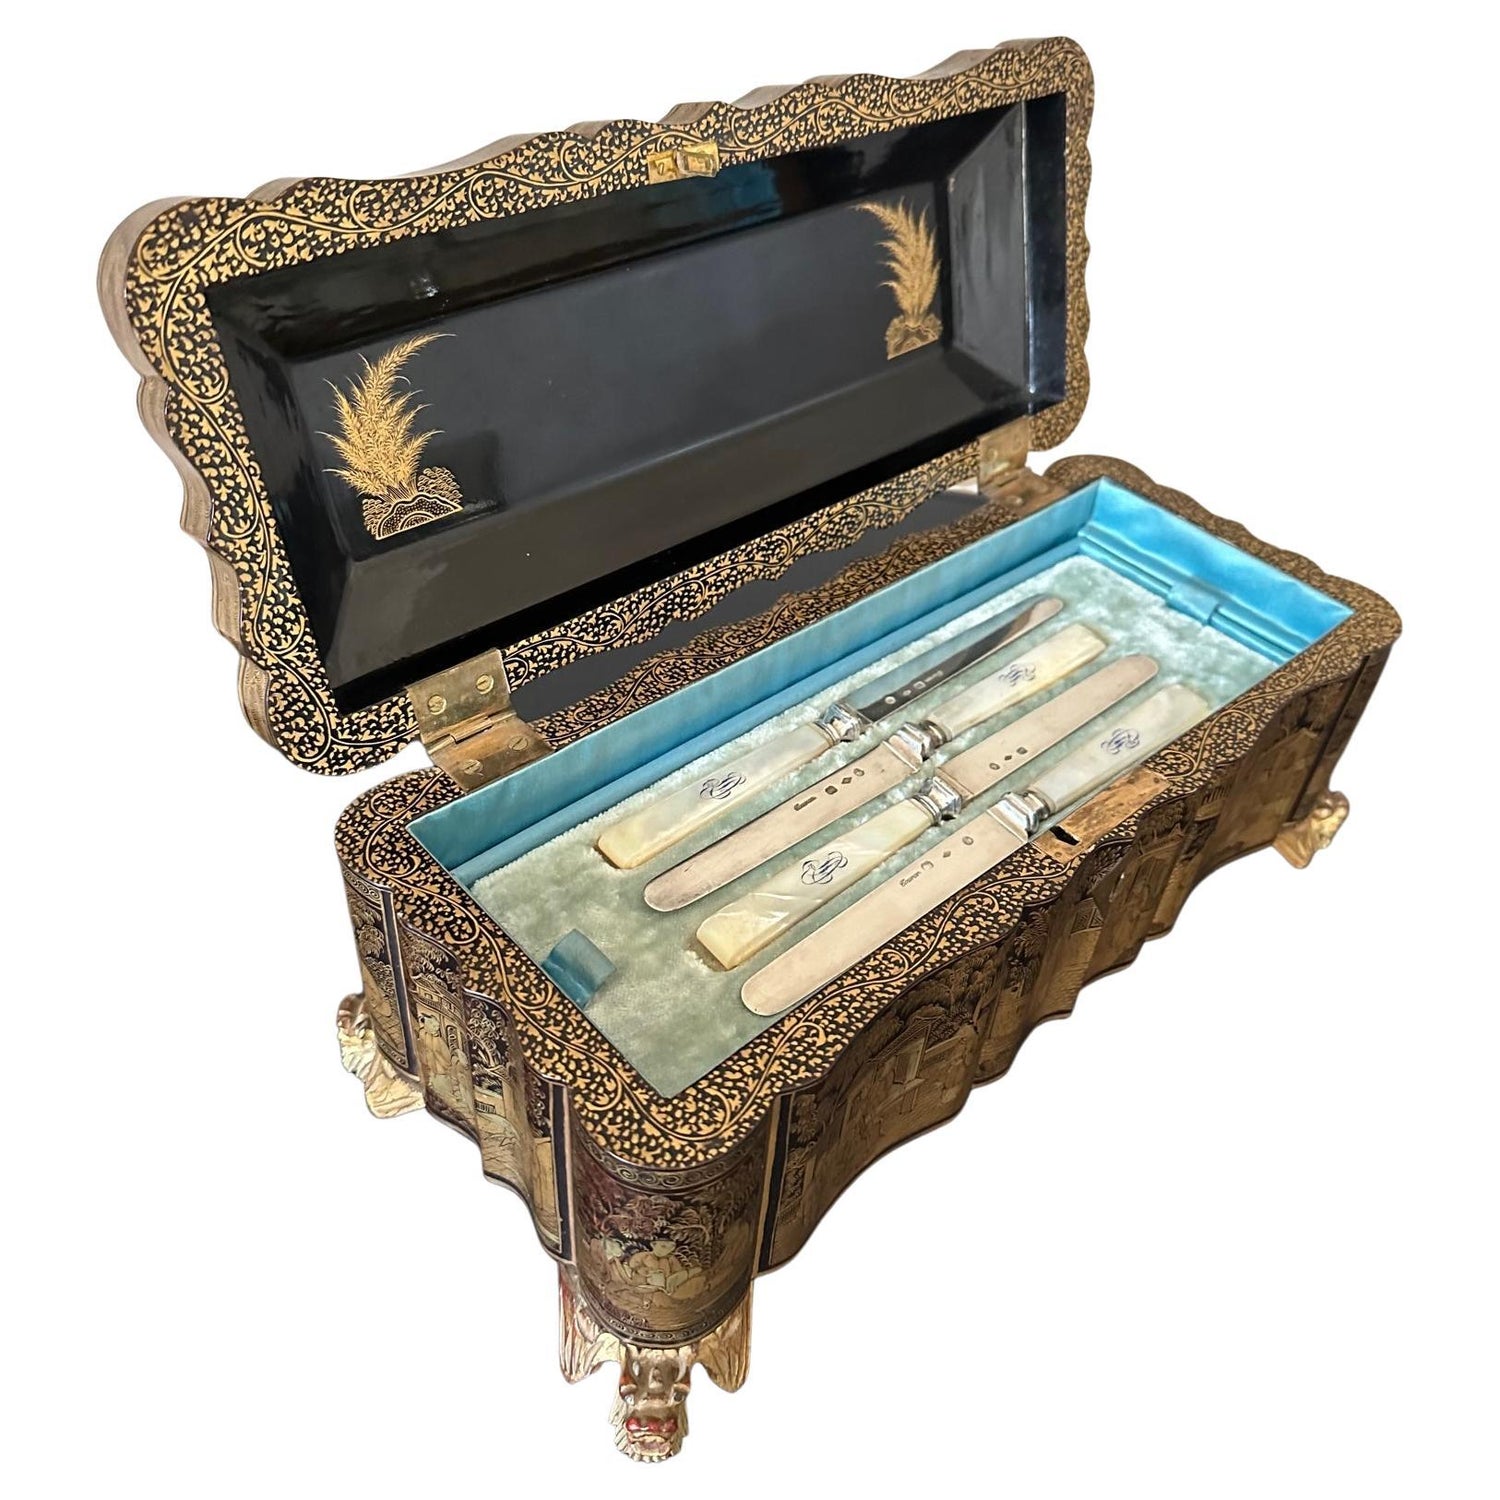 https://a.1stdibscdn.com/19th-century-french-silver-and-mother-of-pearl-cheese-knives-box-1850s-for-sale/f_33633/f_360719021694184889670/f_36071902_1694184890292_bg_processed.jpg?width=1500